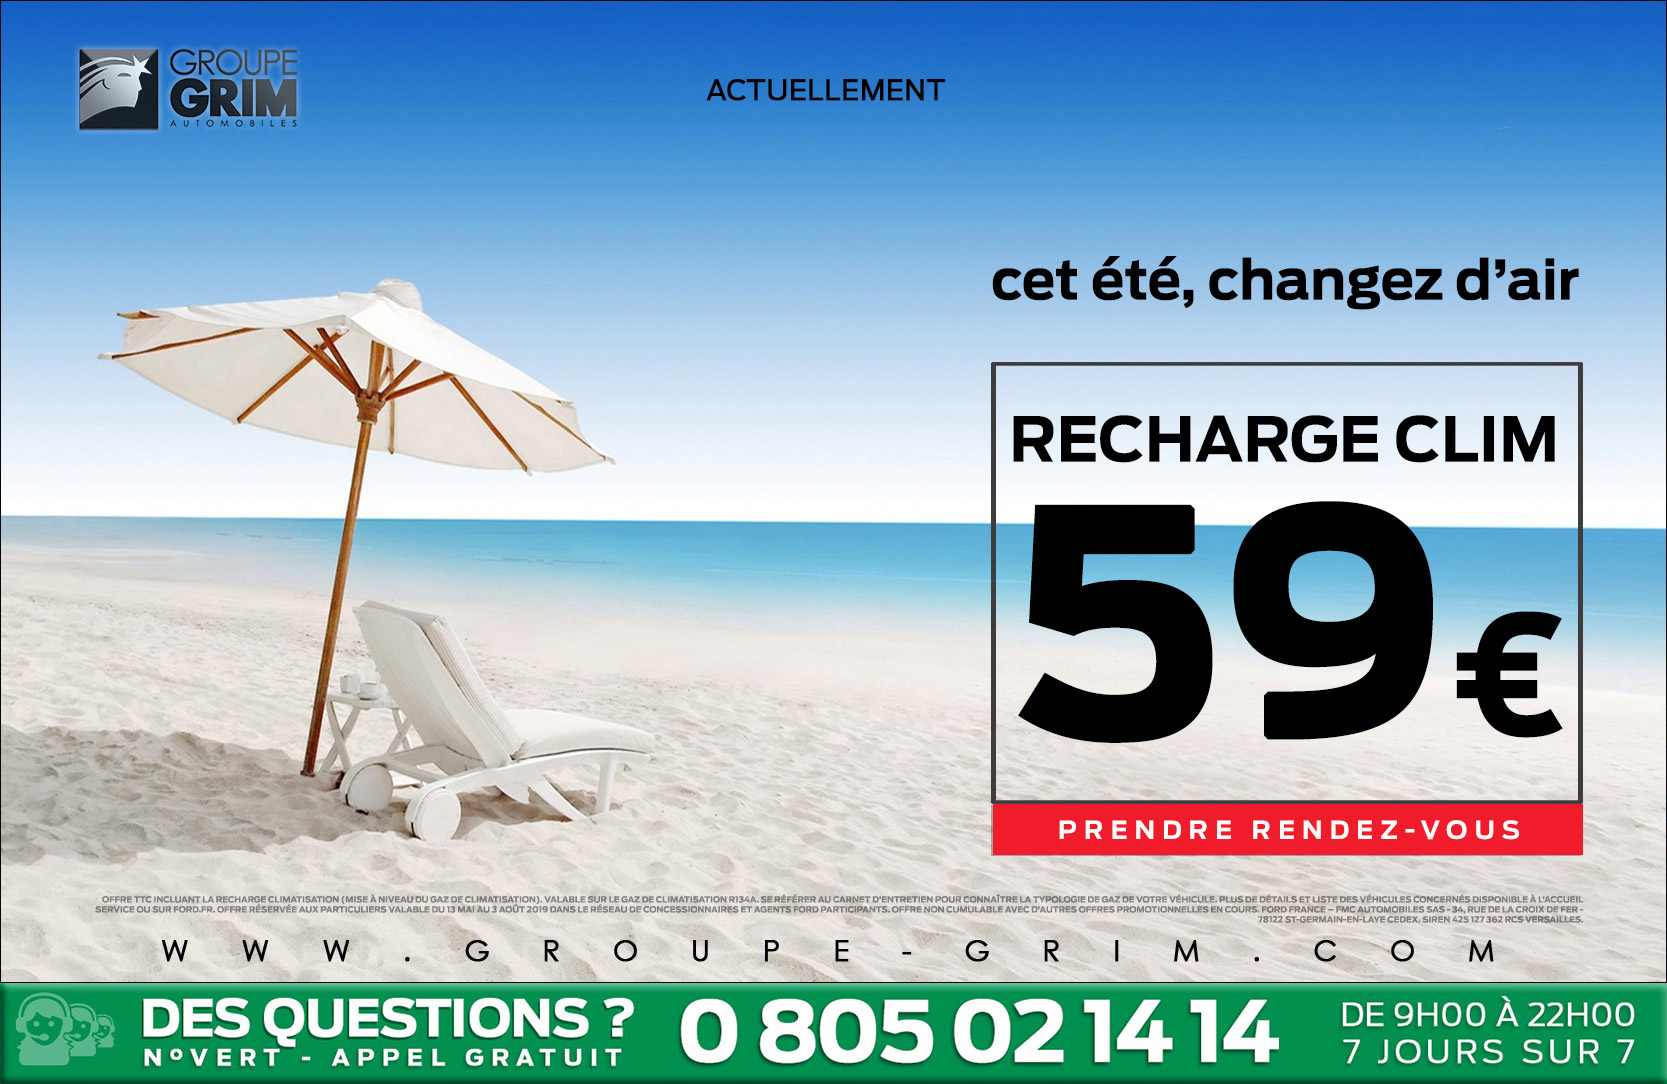 RECHARGE CLIM : 59€ 3 recharge climatisation 1